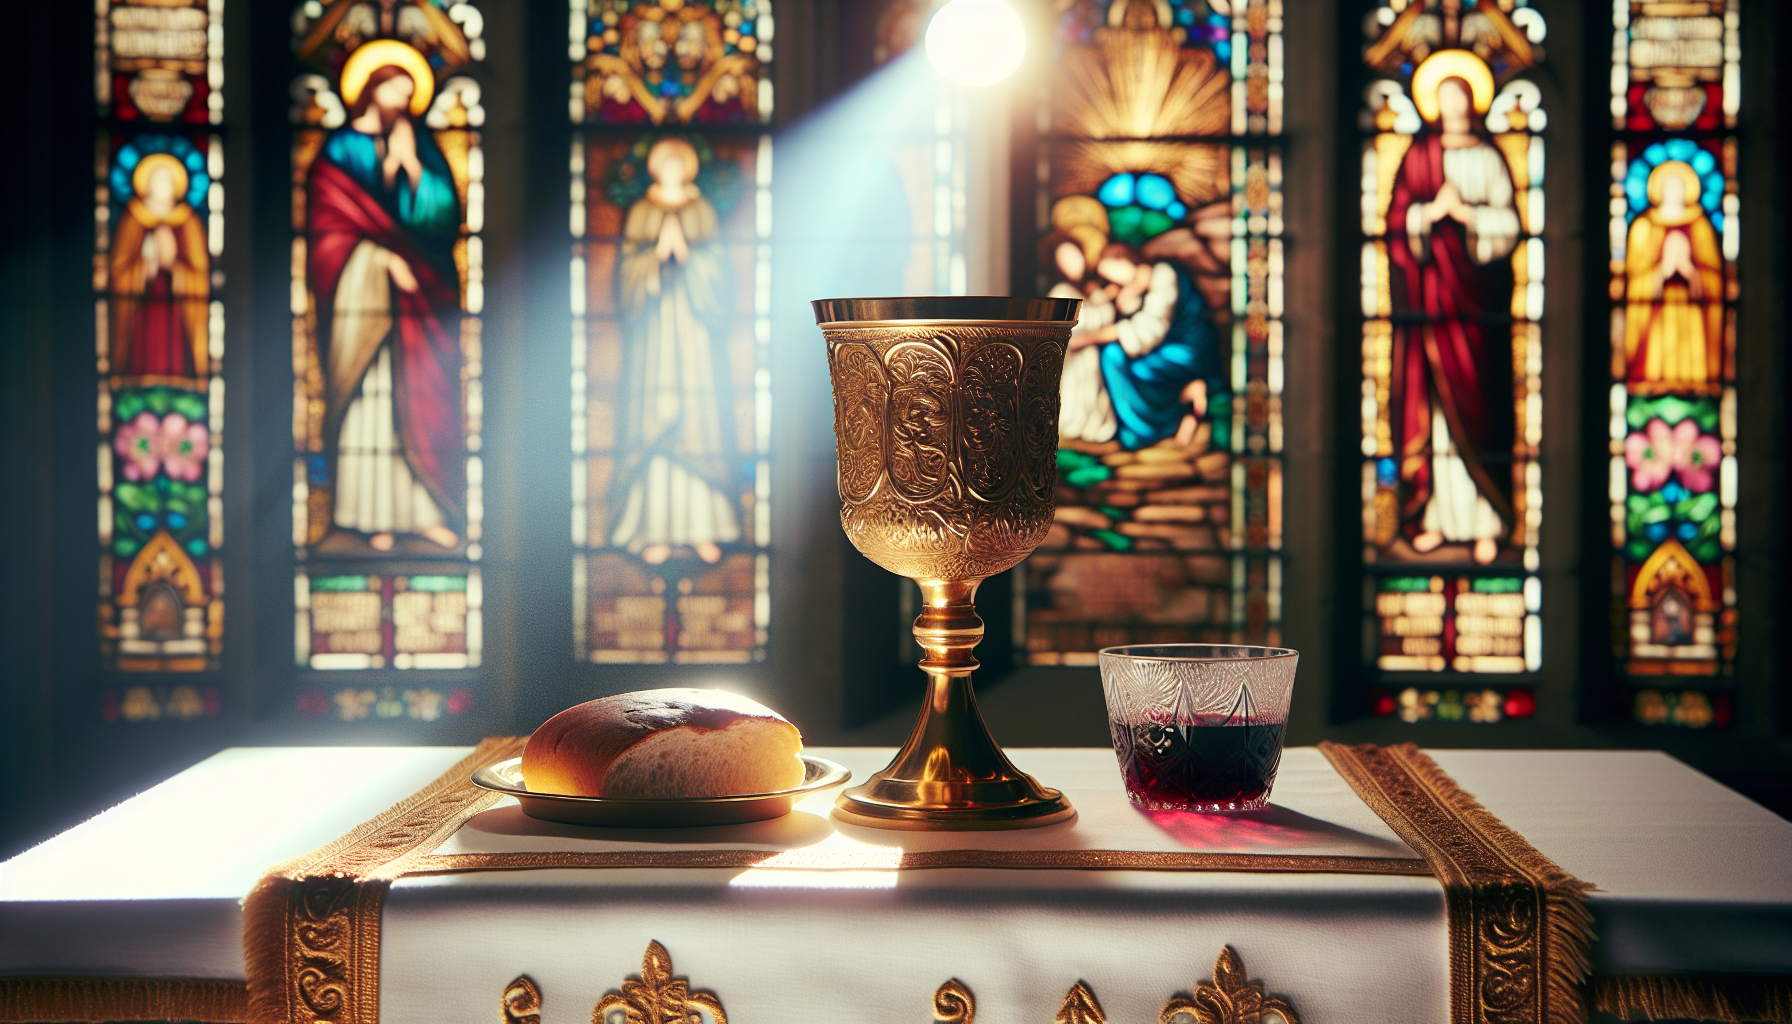 Eucharist with chalice and bread, symbolizing the Real Presence